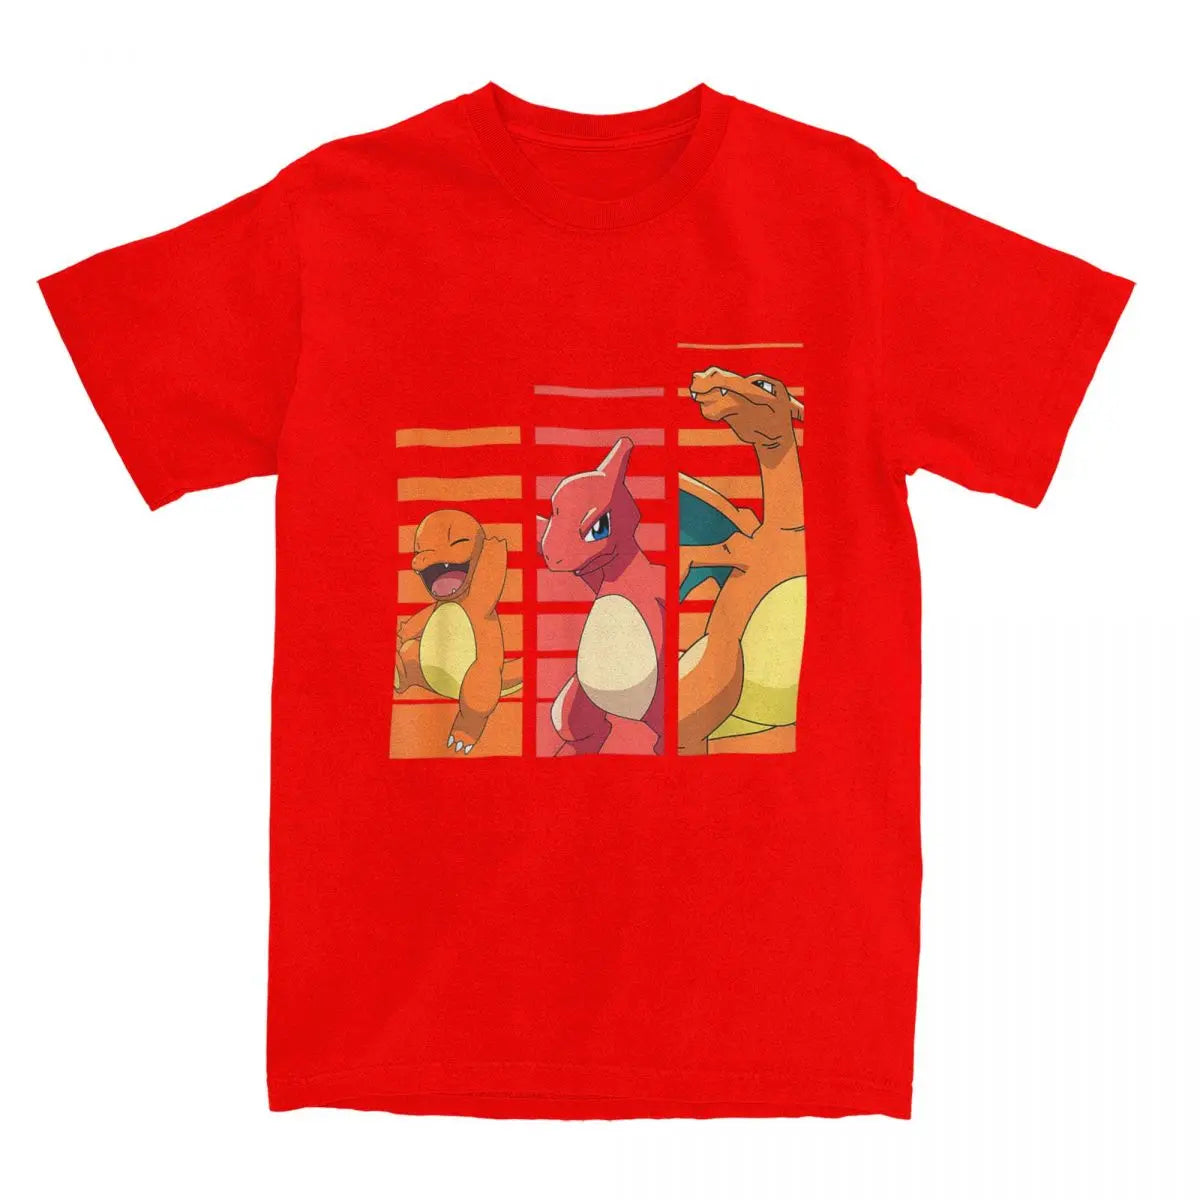 Catch em all with our Pokemon Charmander Evolution Journey Tee | Here at Everythinganimee we have the worlds best anime merch | Free Global Shipping